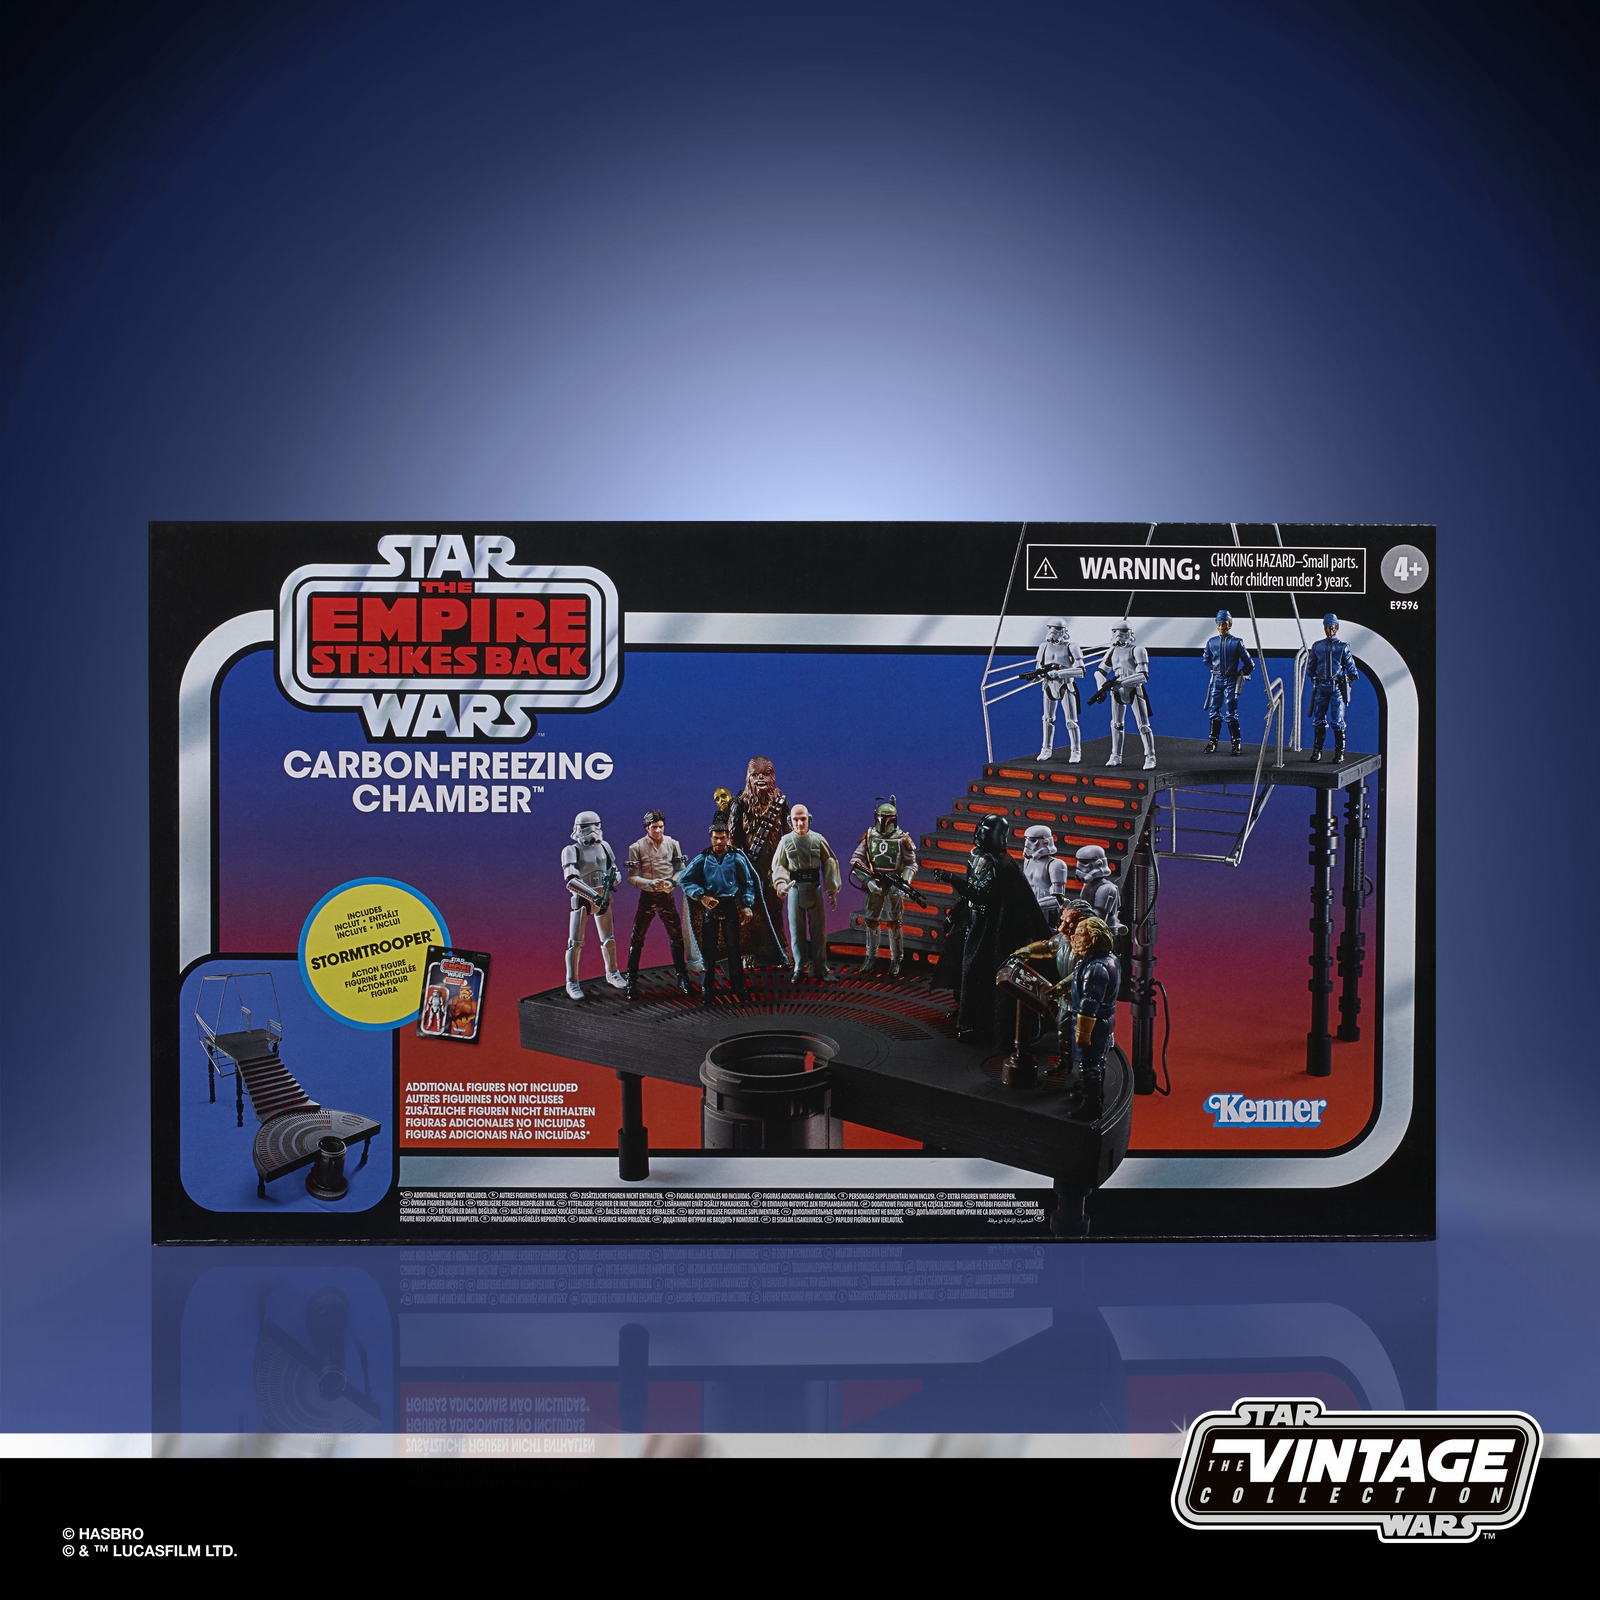 STAR WARS THE VINTAGE COLLECTION CARBON-FREEZING CHAMBER Playset - in pck (2).jpg